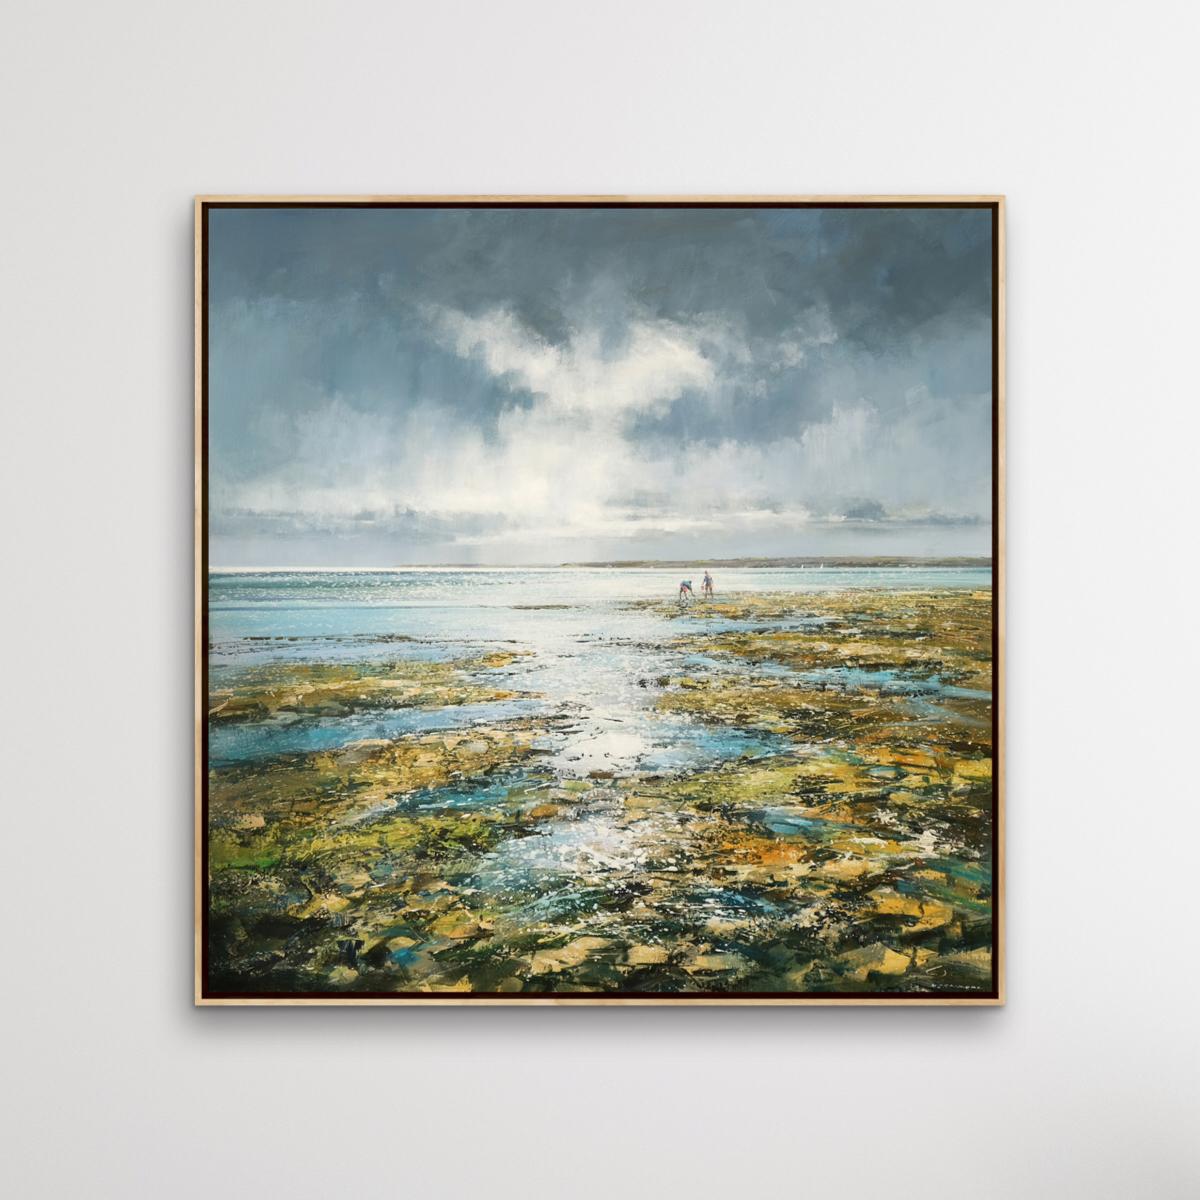 Seaweed and Shells by Michael Sanders [2022]

An original mixed-media painting by Michael Sanders. 90 x 90 cm deep edge canvas painted around the edges and ready to hang.

Additional information:
Original
Acrylic and mixed-media
Image size: H:90 cm